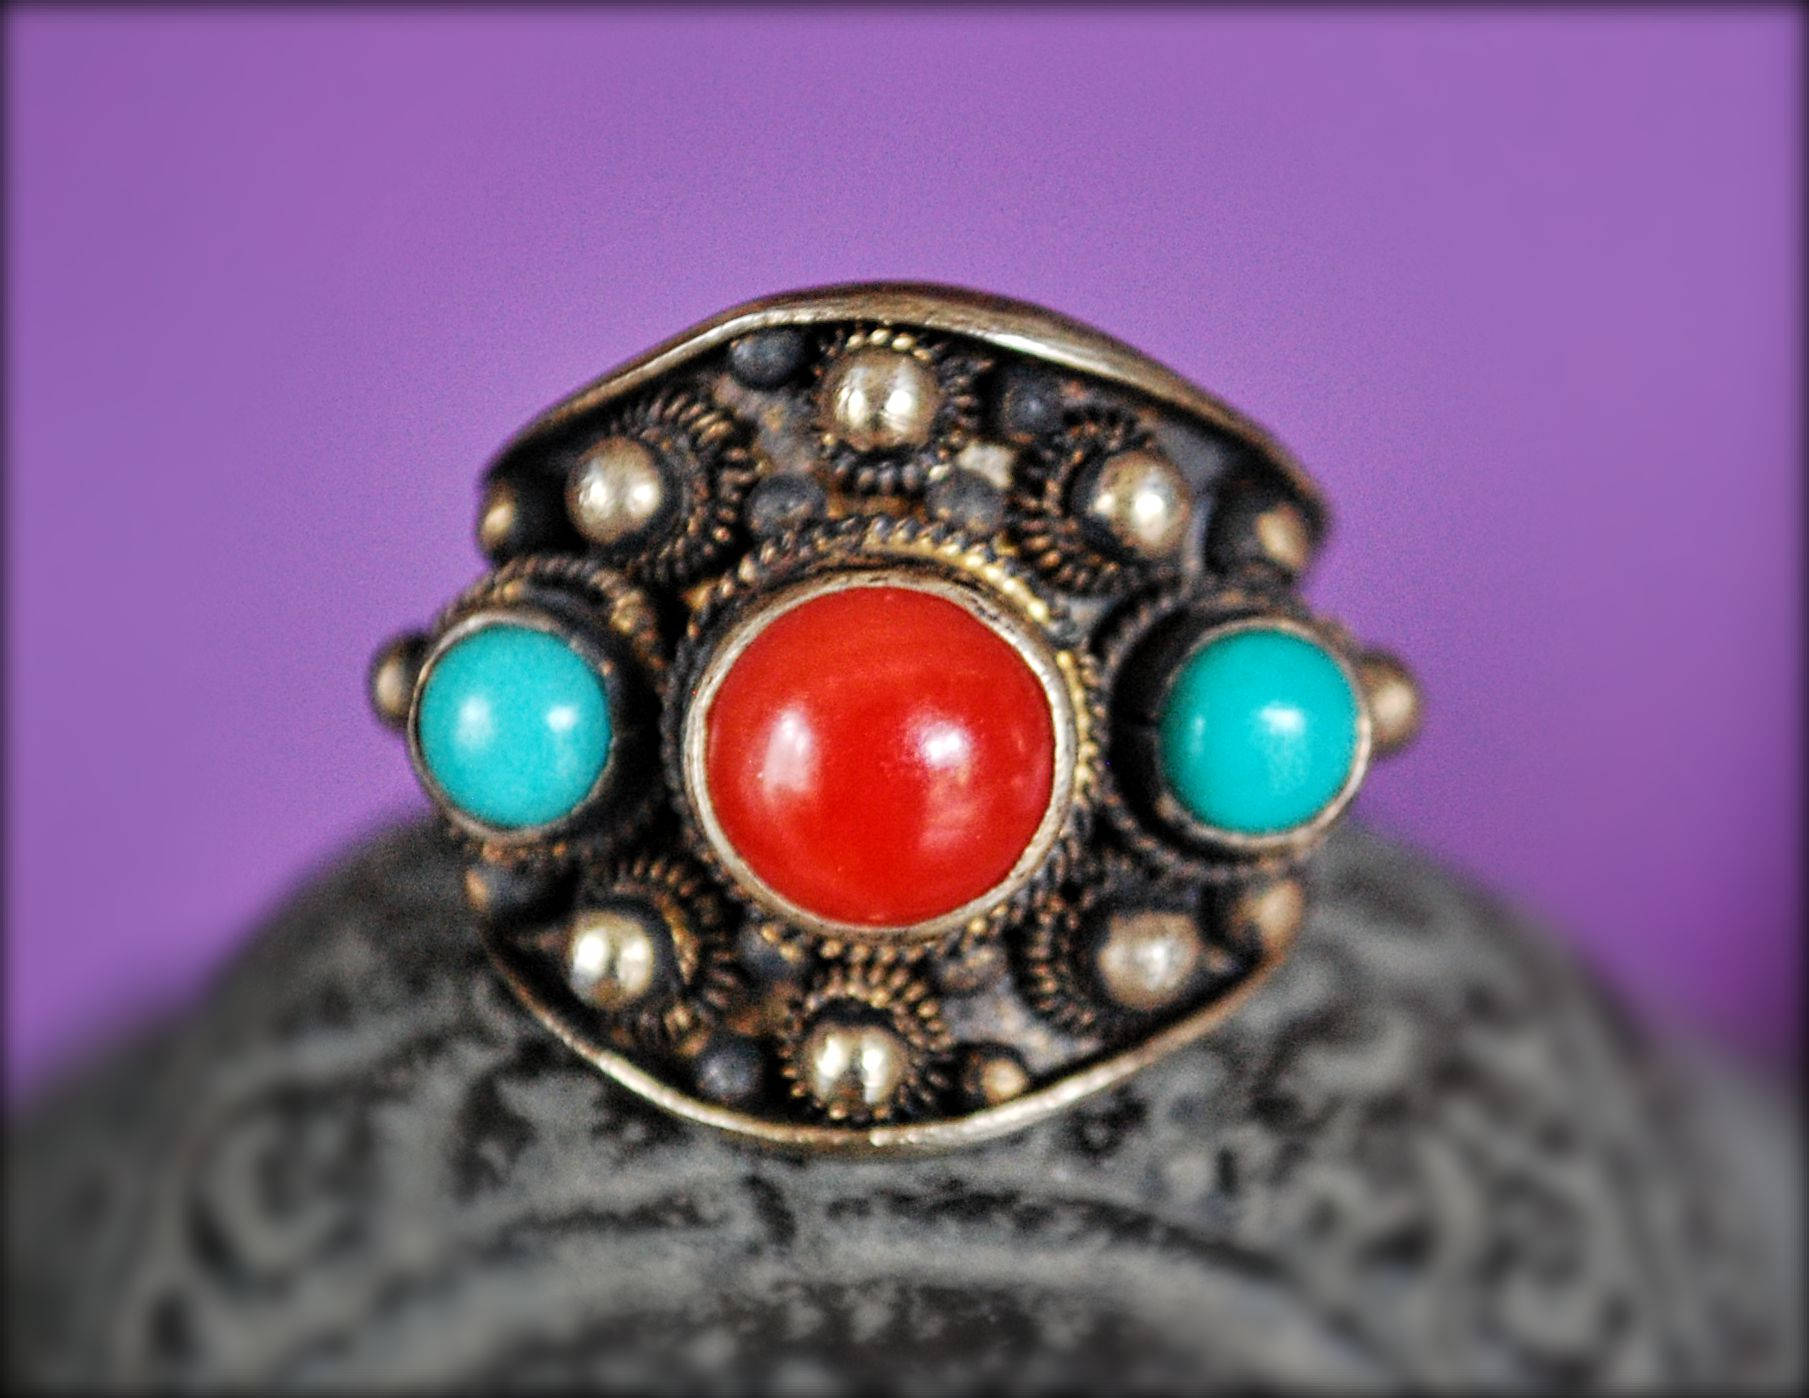 Antique Chinese Coral and Turquoise Ring - Size 8 - Antique Chinese Ring - Ethnic Chinese Ring - Antique Coral Ring - Old Chinese Ring